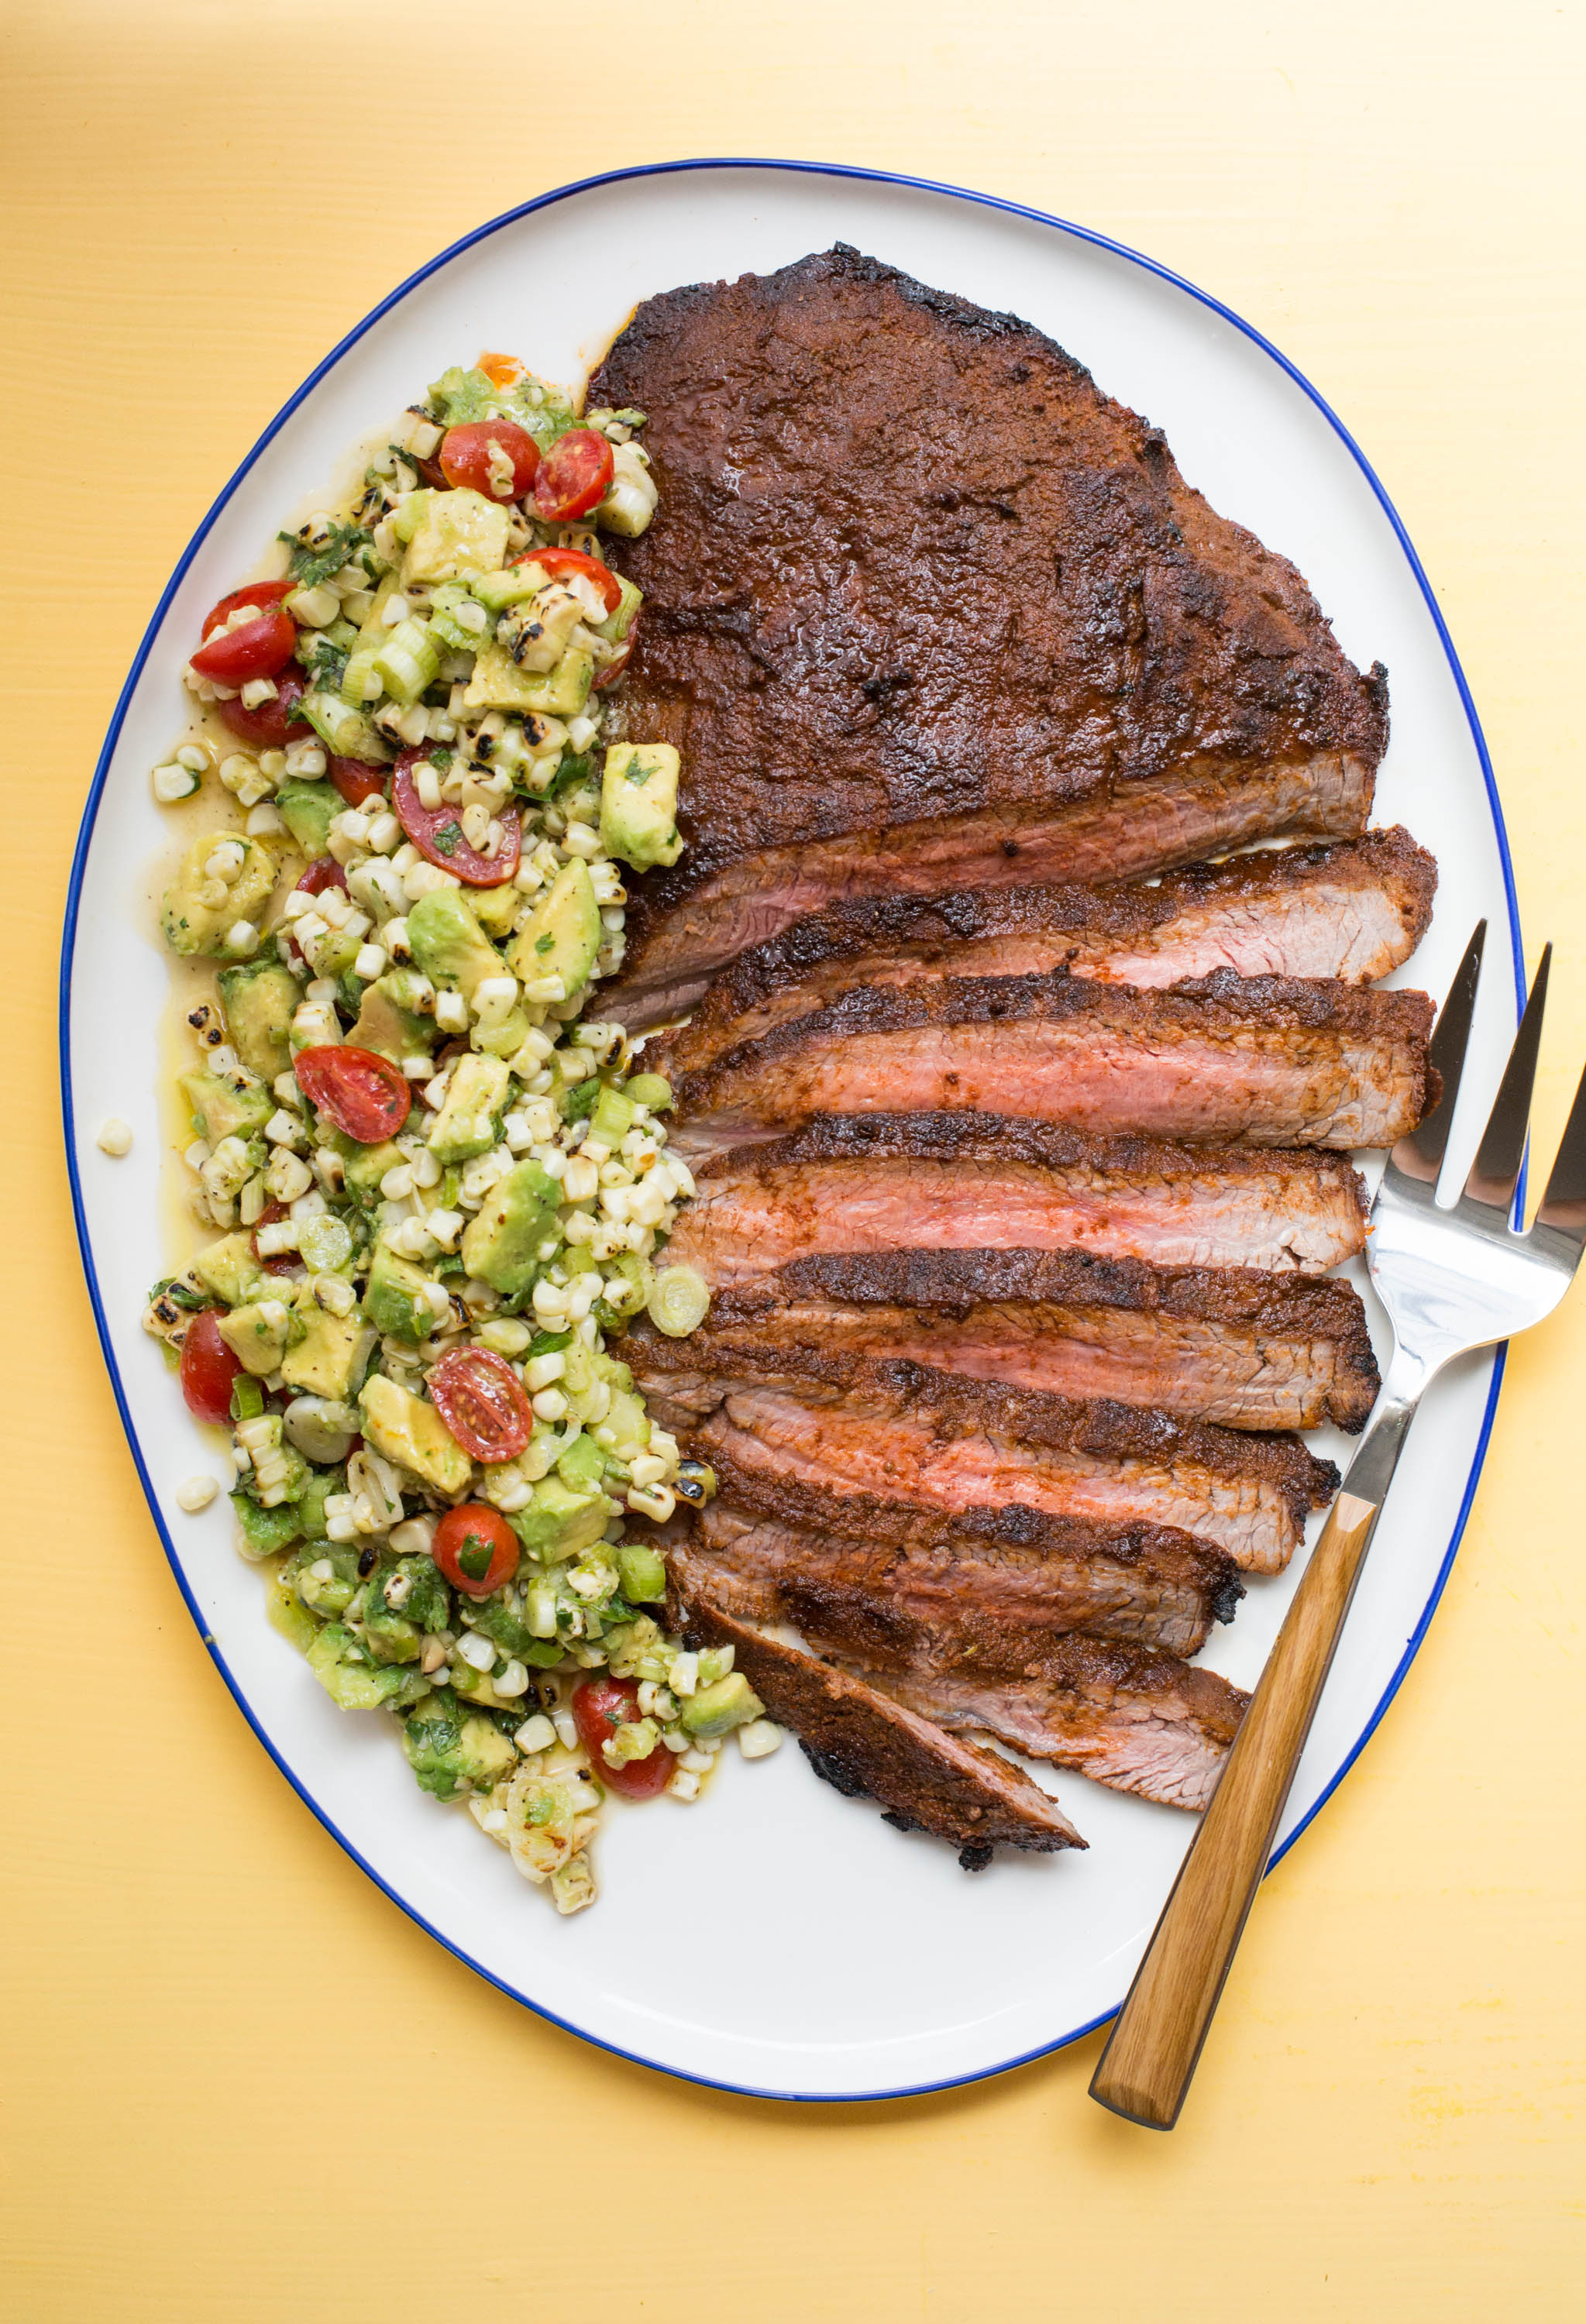 Fork on a plate of Chili Rubbed Flank Steak with Corn, Tomato and Avocado Salad.